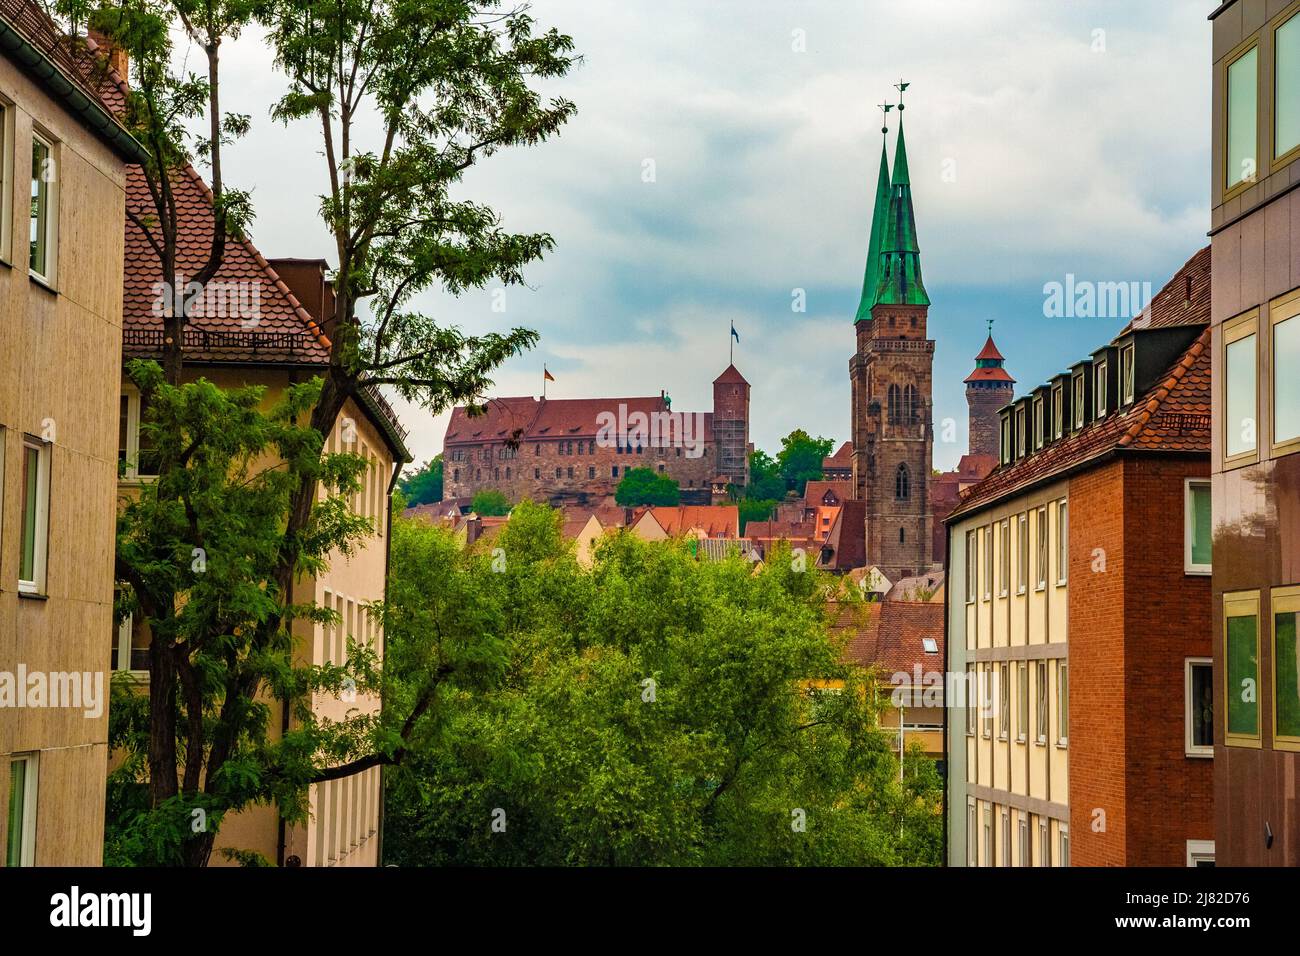 The Imperial castle (Kaiserburg) with Heathens' Tower (Heidenturm) and Sinwell Tower (Sinwellturm) on the ridge in Nuremberg. In front are the two... Stock Photo